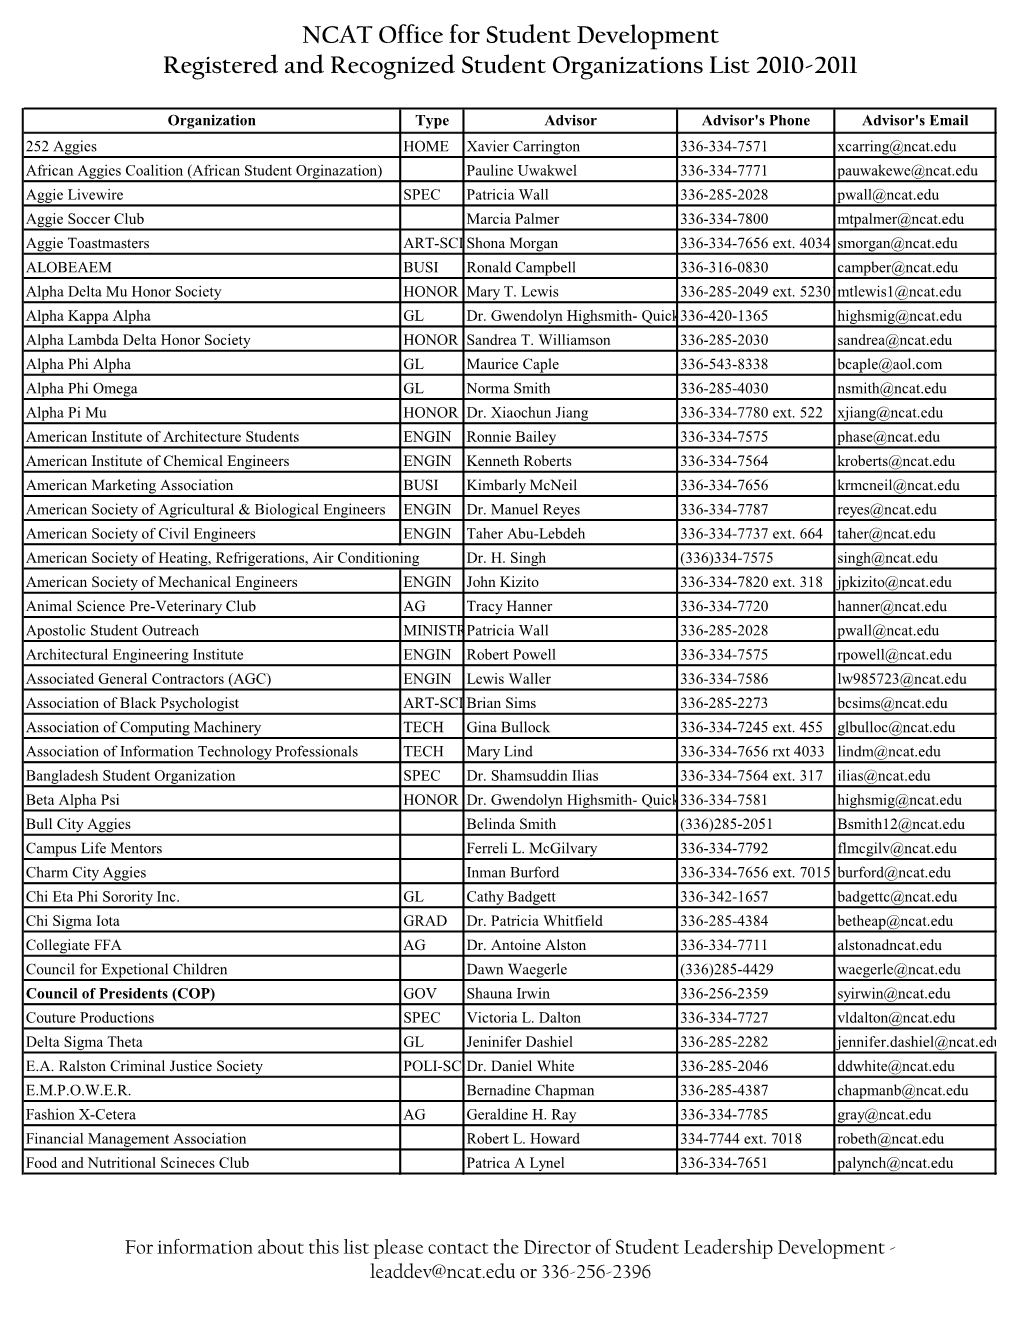 NCAT Office for Student Development Registered and Recognized Student Organizations List 2010-2011